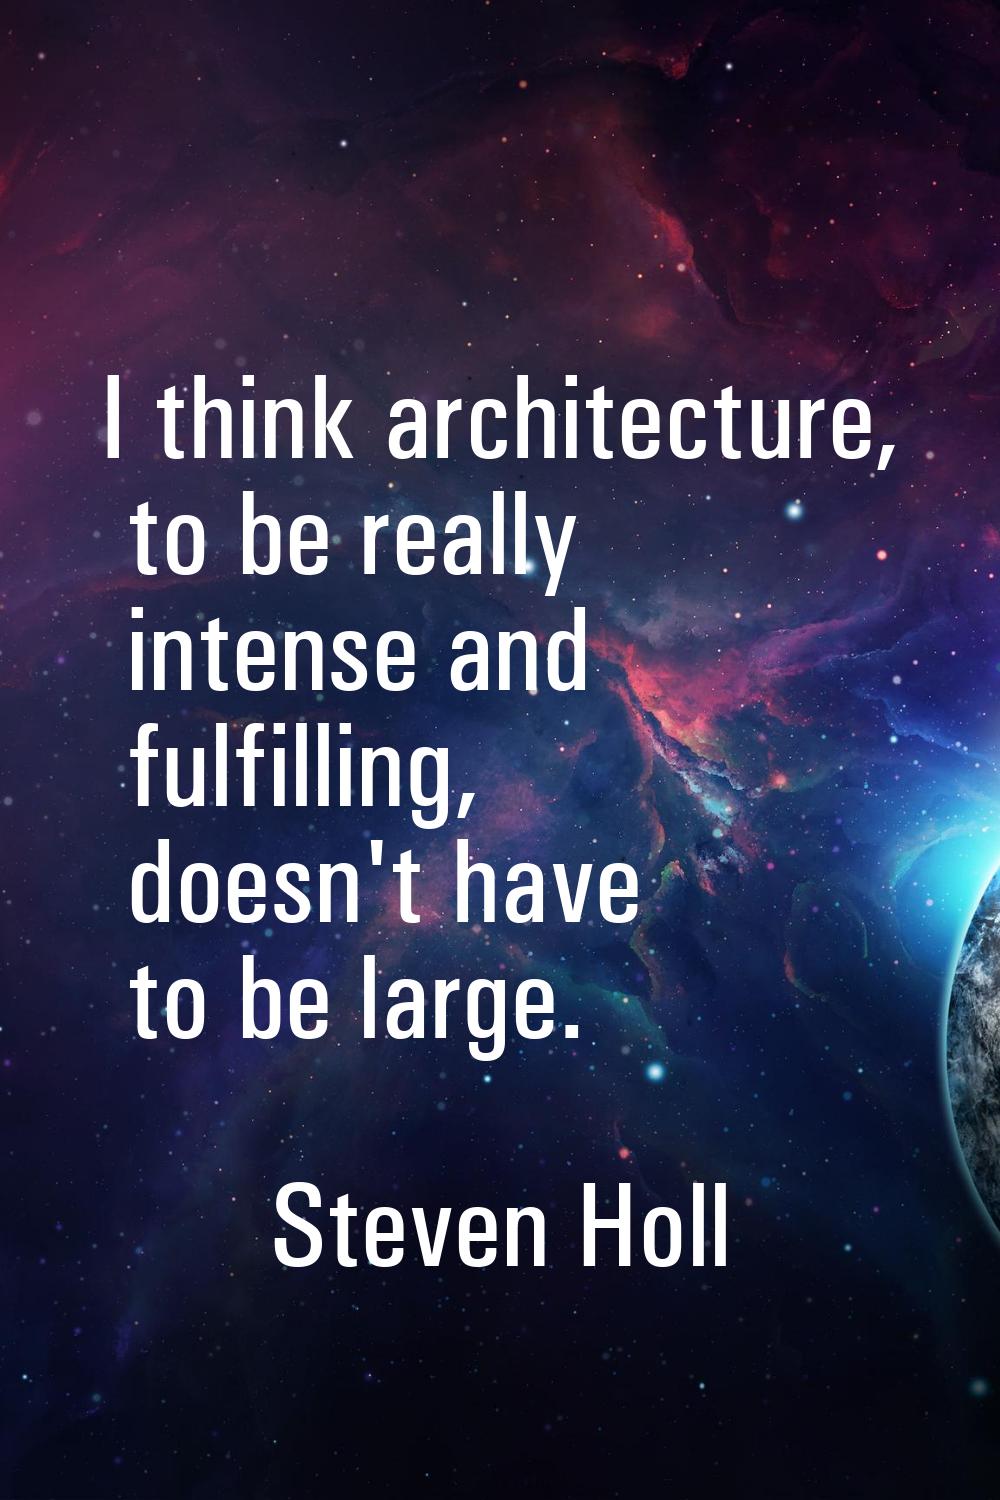 I think architecture, to be really intense and fulfilling, doesn't have to be large.